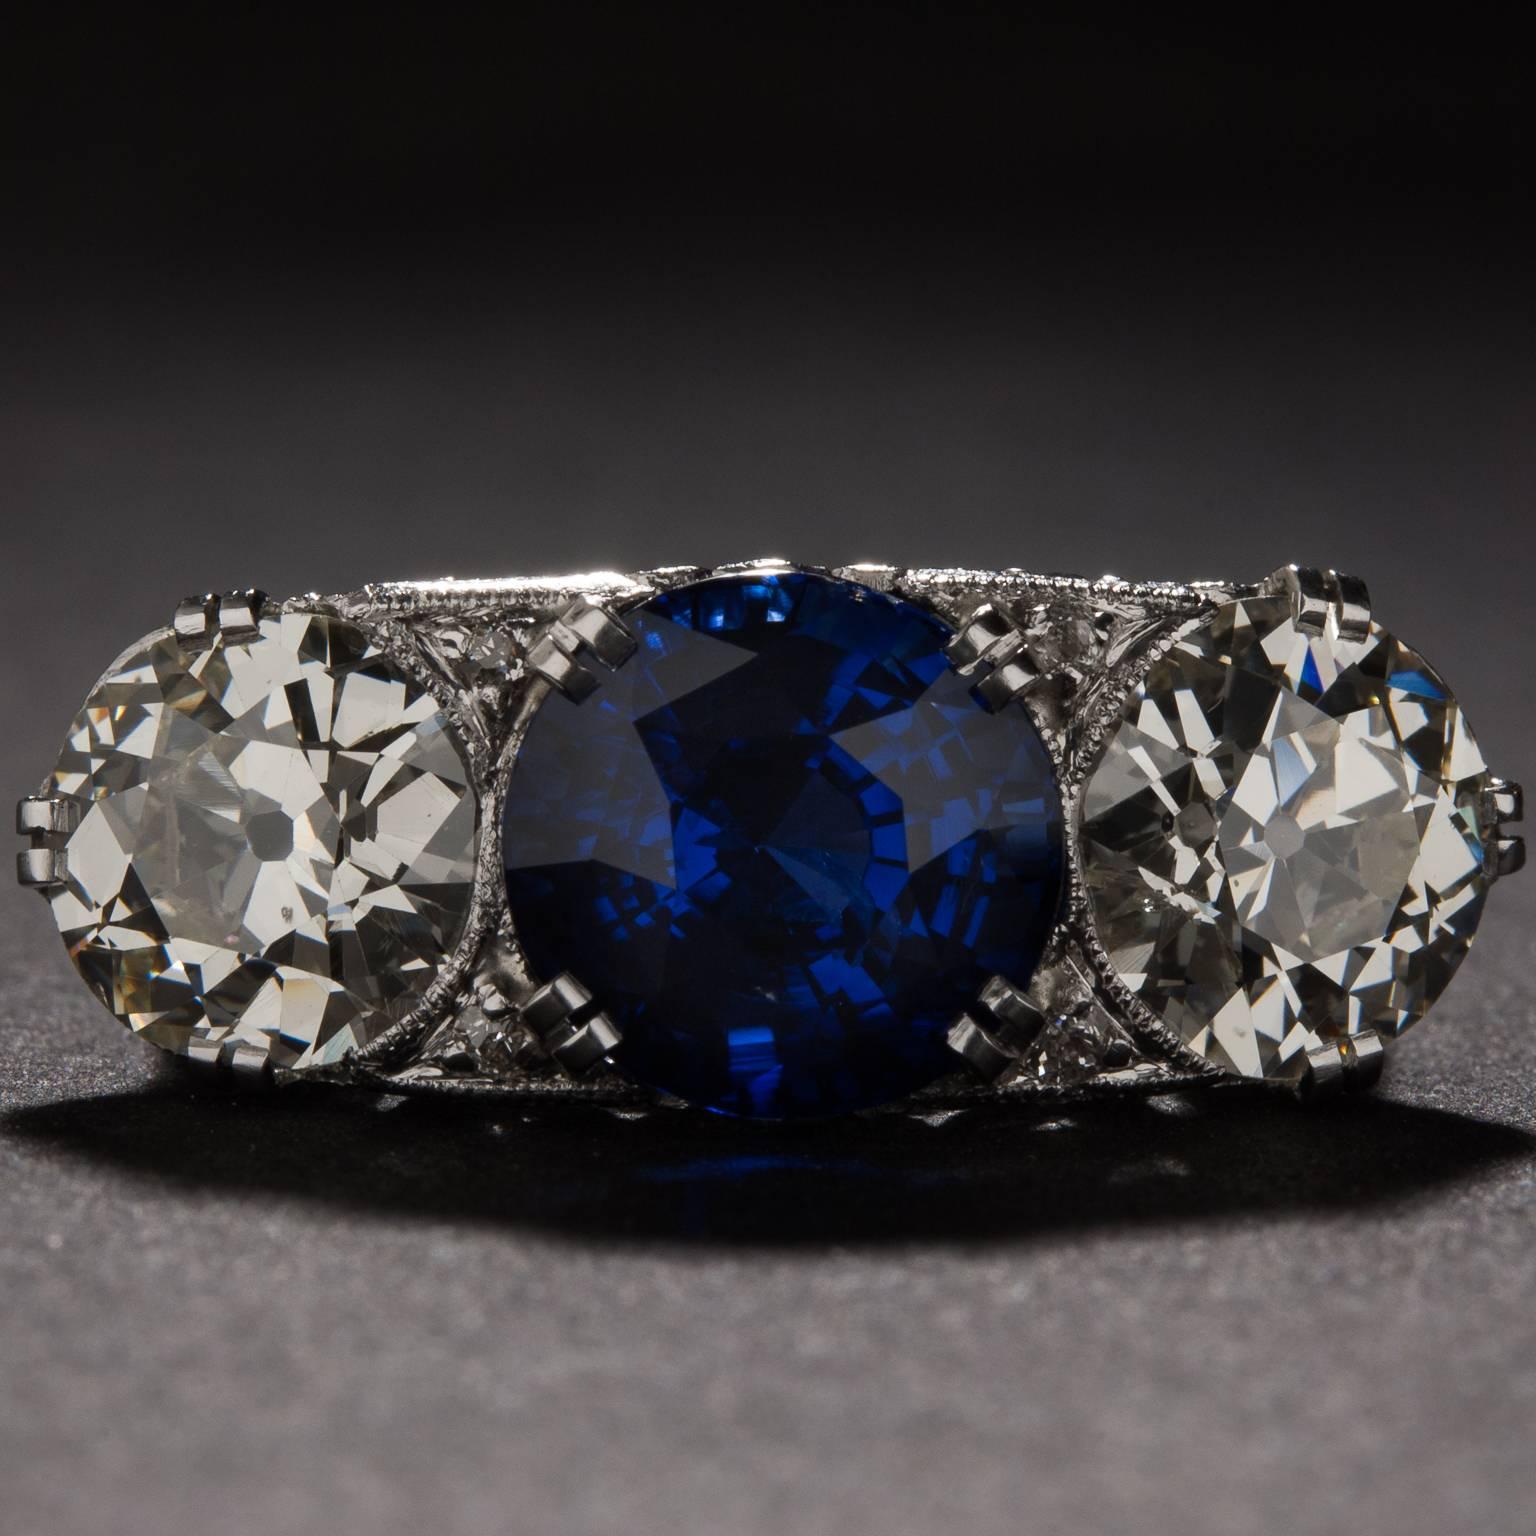 This extraordinary Art Deco era ring features a 4.08 carat center sapphire which is accented by 2 large diamonds weighing 1.63 carats and 1.66 carats respectively. The ring was made in platinum circa 1920 and is currently size 6.